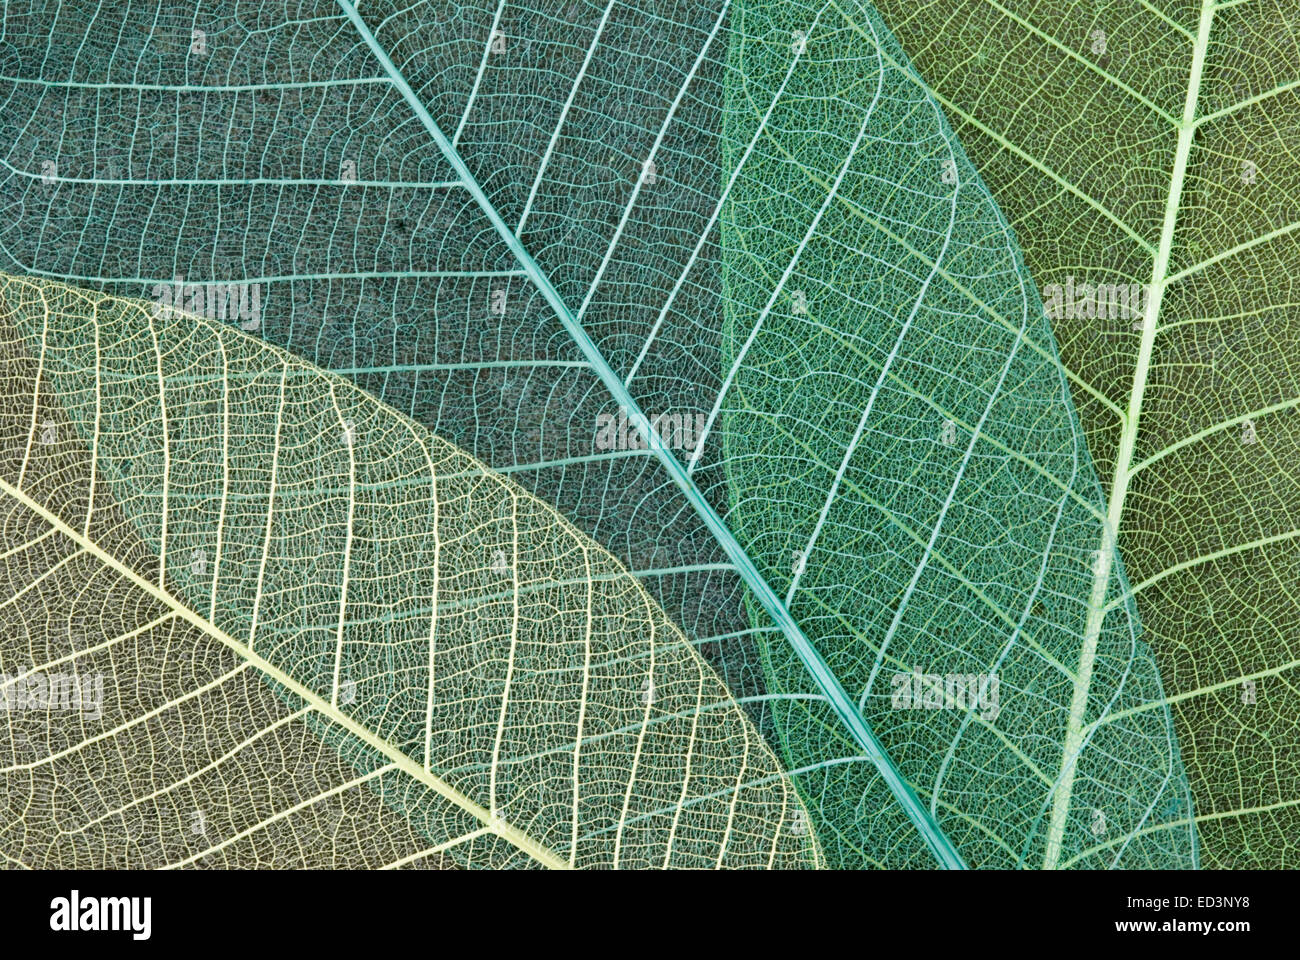 Overlapping skeleton leaves from the Thai Rubber Tree - Hevea brasiliensis Stock Photo